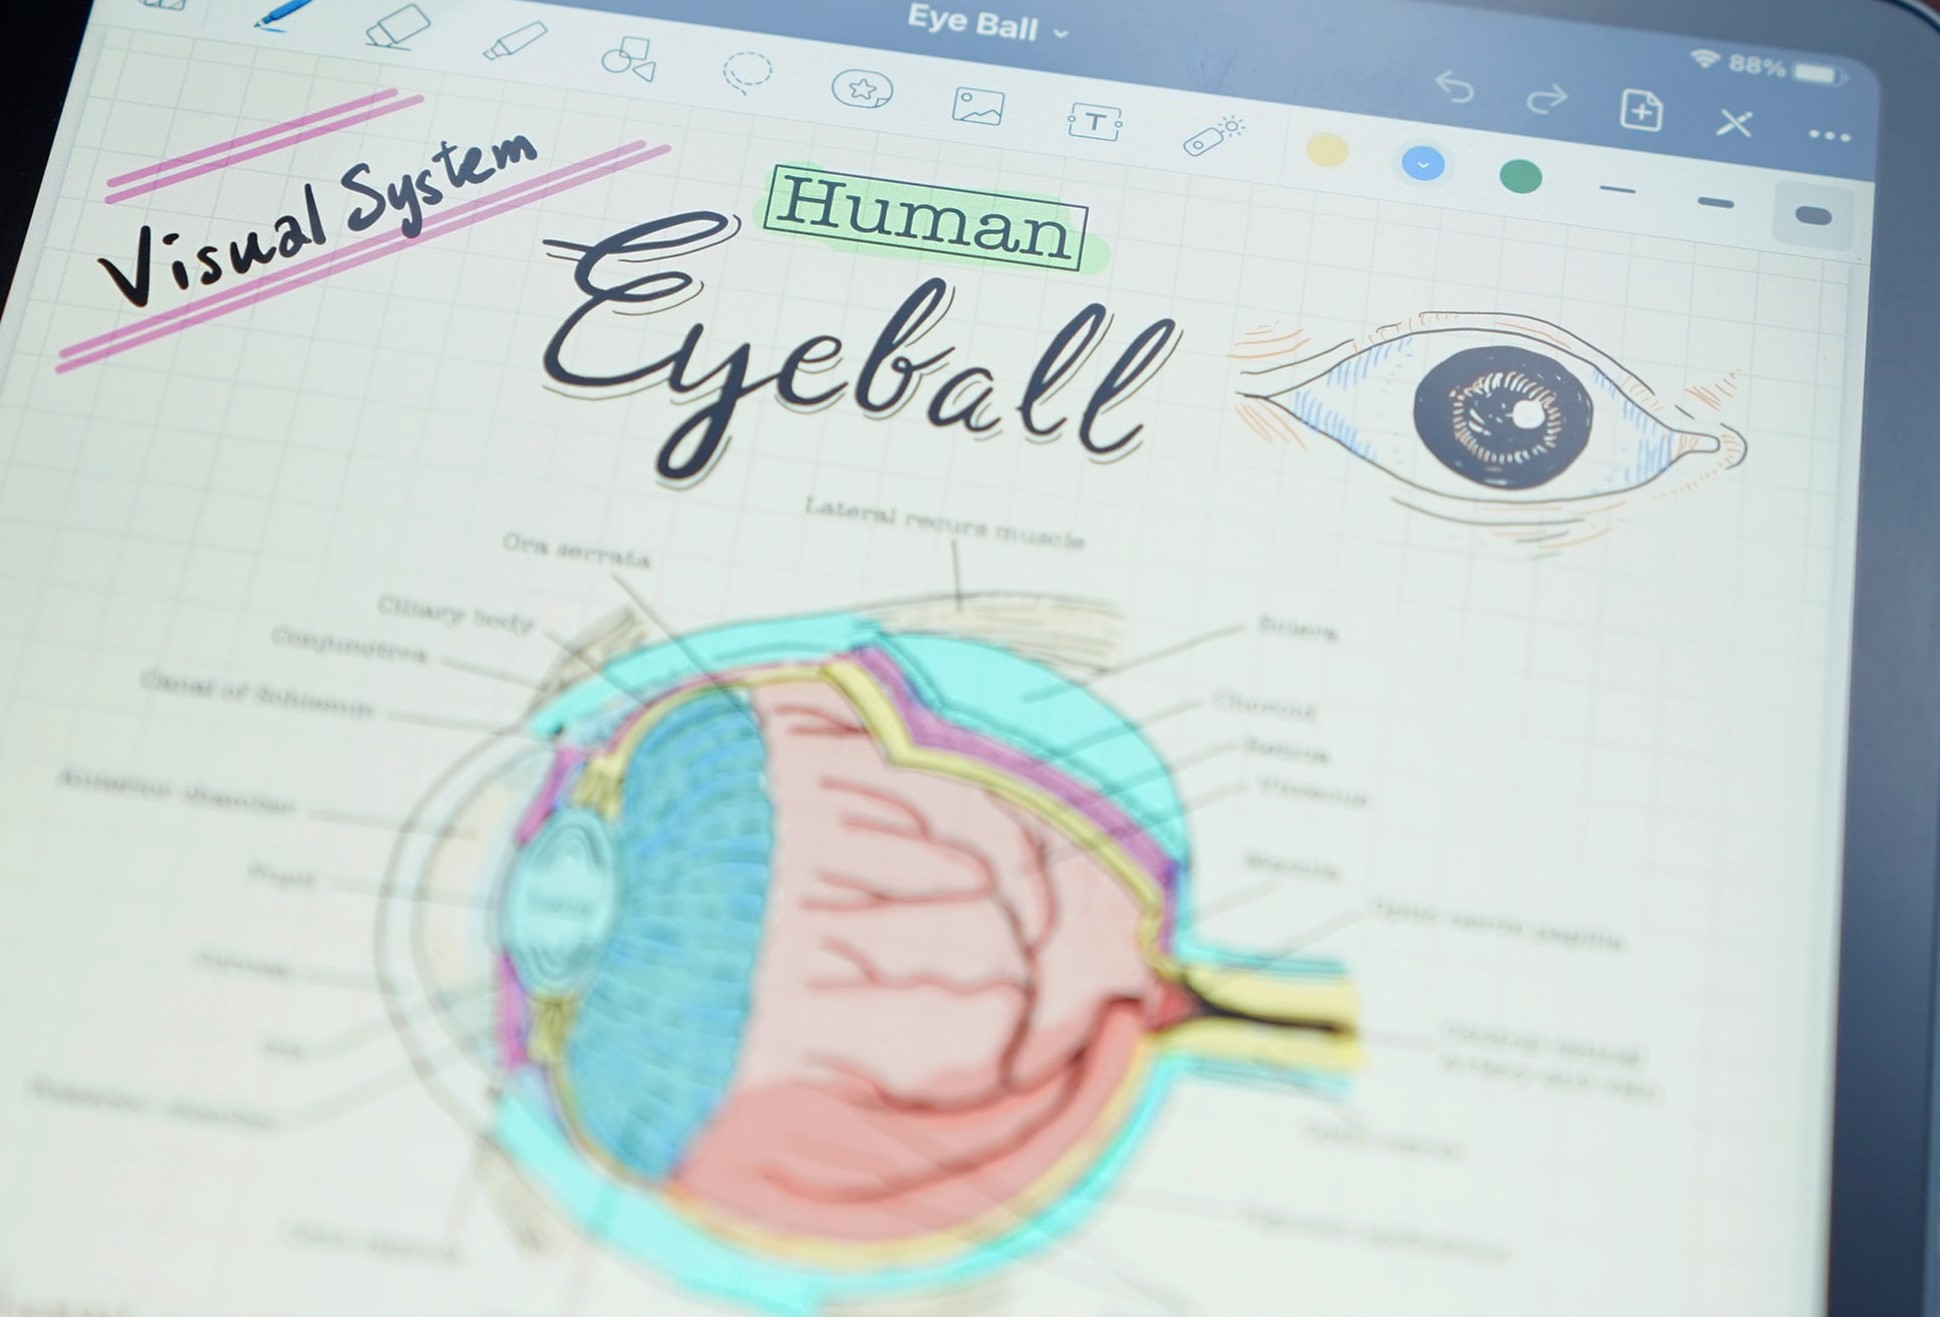 A student's notes about the visual system on an iPad